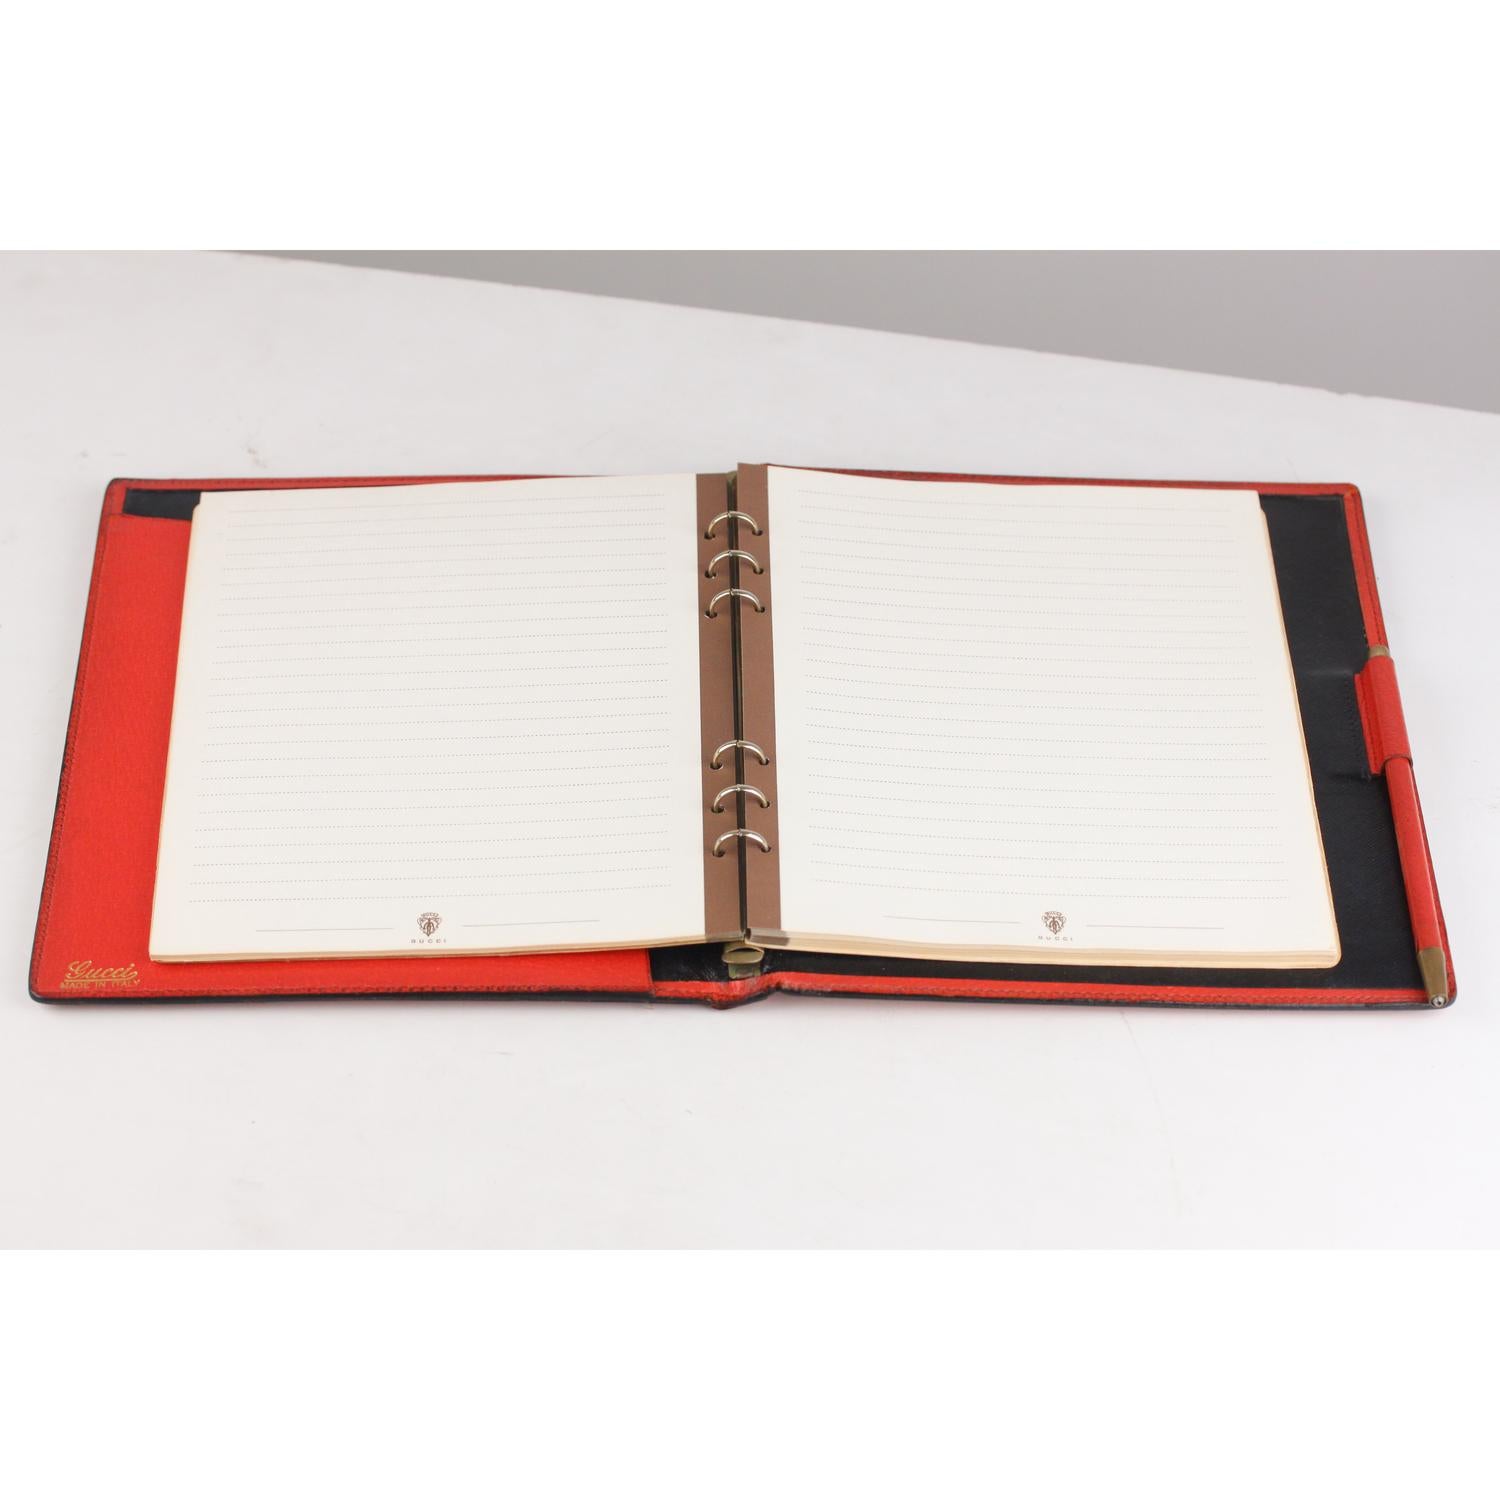 Elegant vintage agenda cover by GUCCI crafted red leather. Black leather interior. It features a six ring binder with original GUCCi notes sheets. Mechanical pencil included. 1 side open slot. 'GUCCI - Made in Italy' embossed inside.